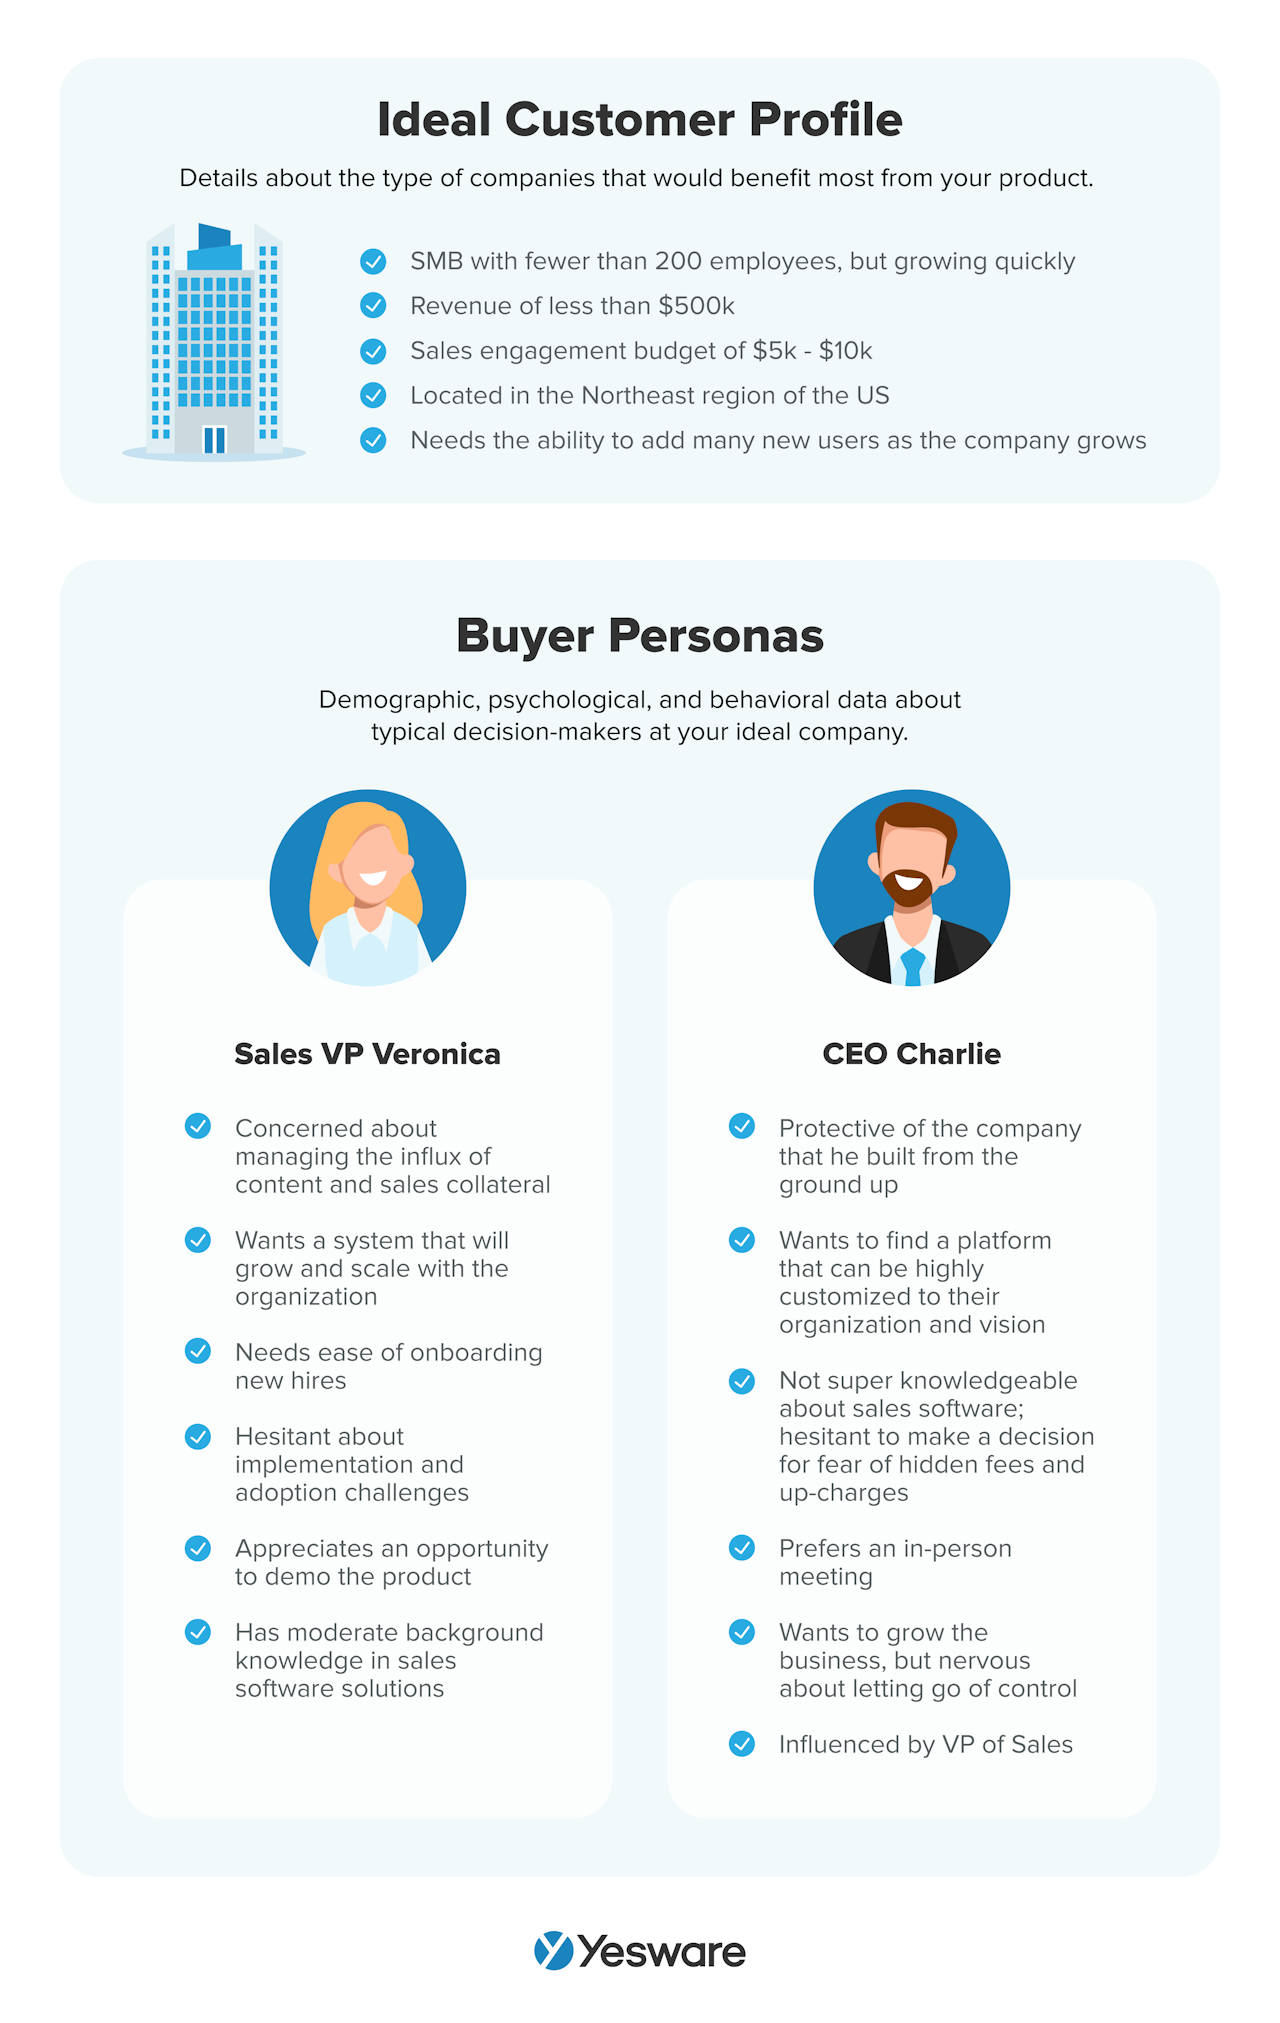 B2B Lead Generation: Ideal Customer Profile and Buyer Persona